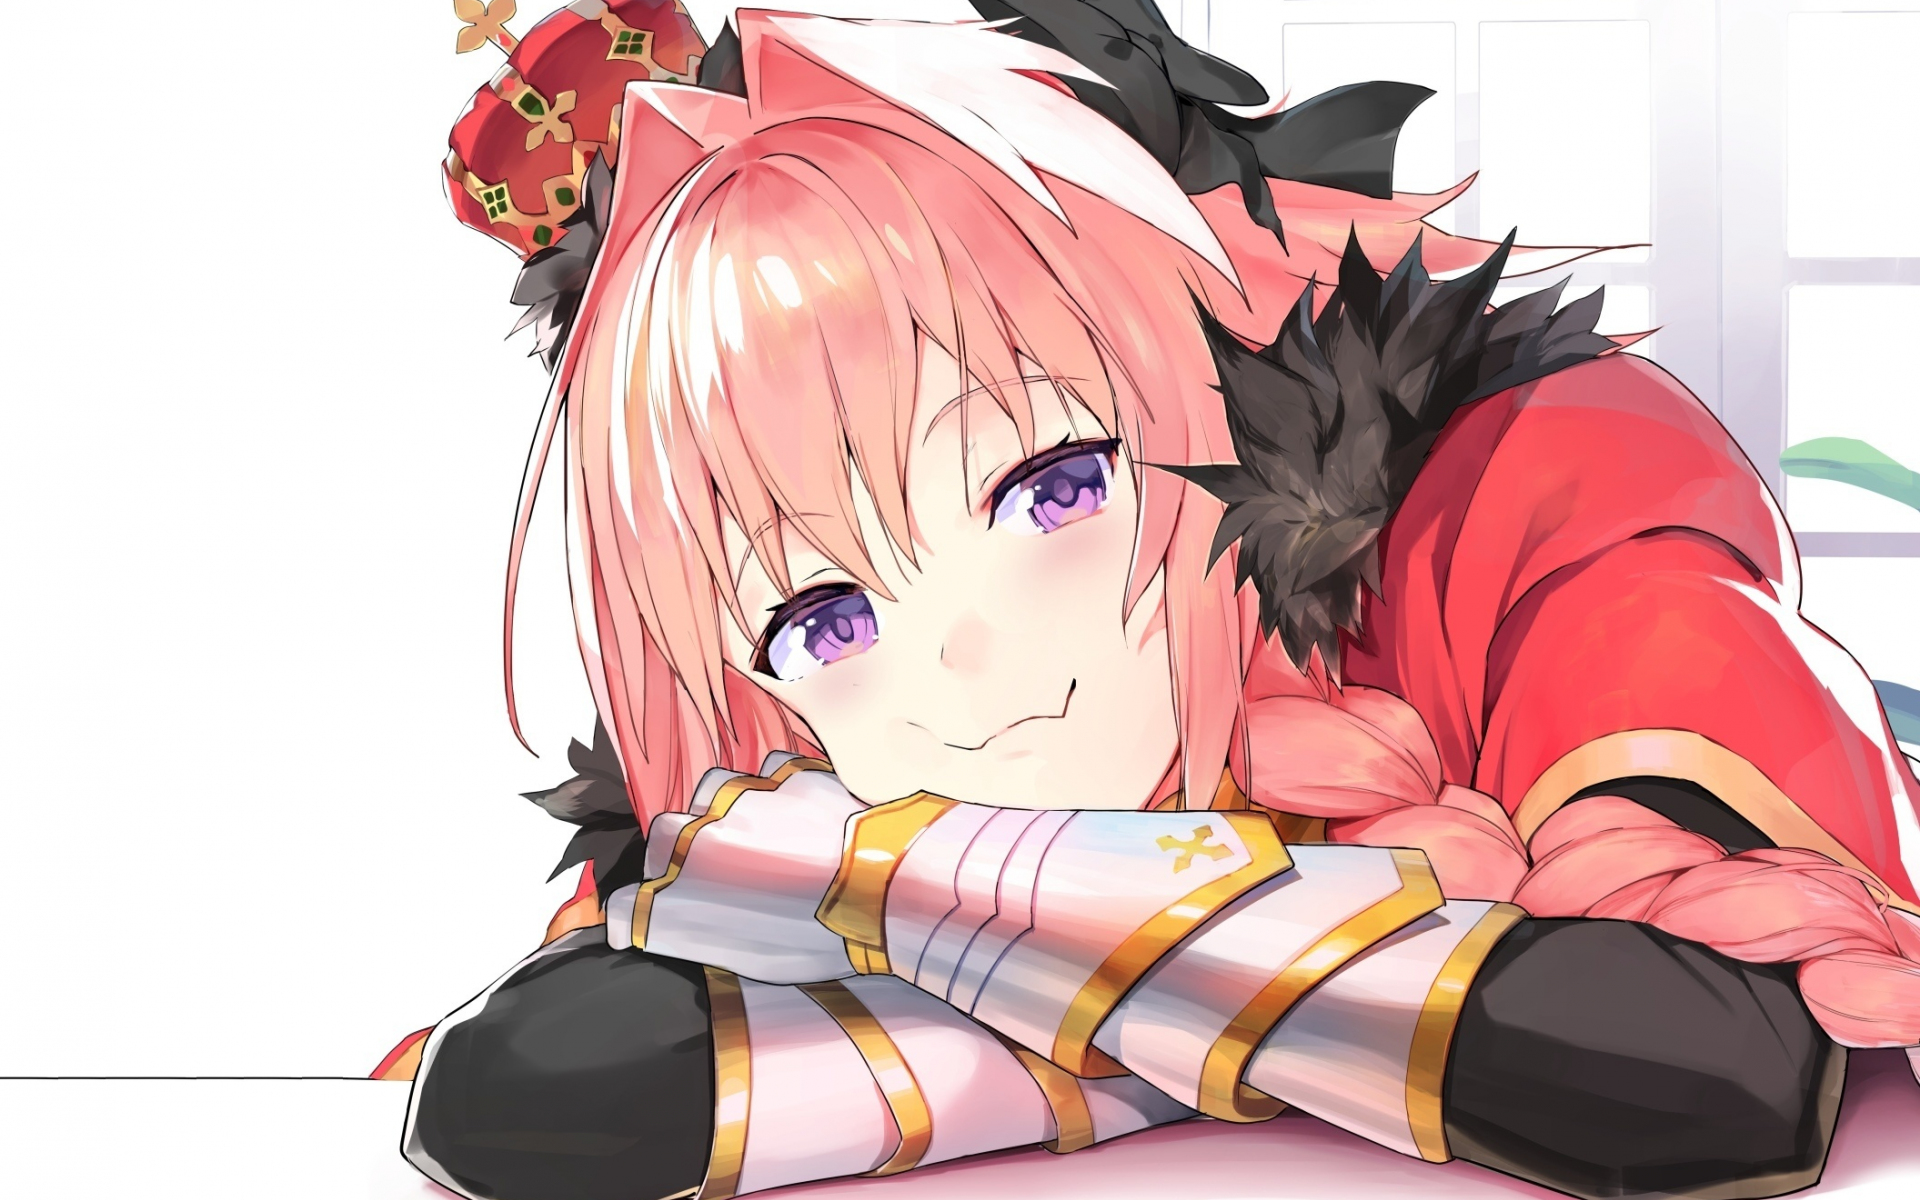 Download 19x10 Wallpaper Cute Smile Astolfo Fate Apocrypha Widescreen 16 10 Widescreen 19x10 Hd Image Background 5606